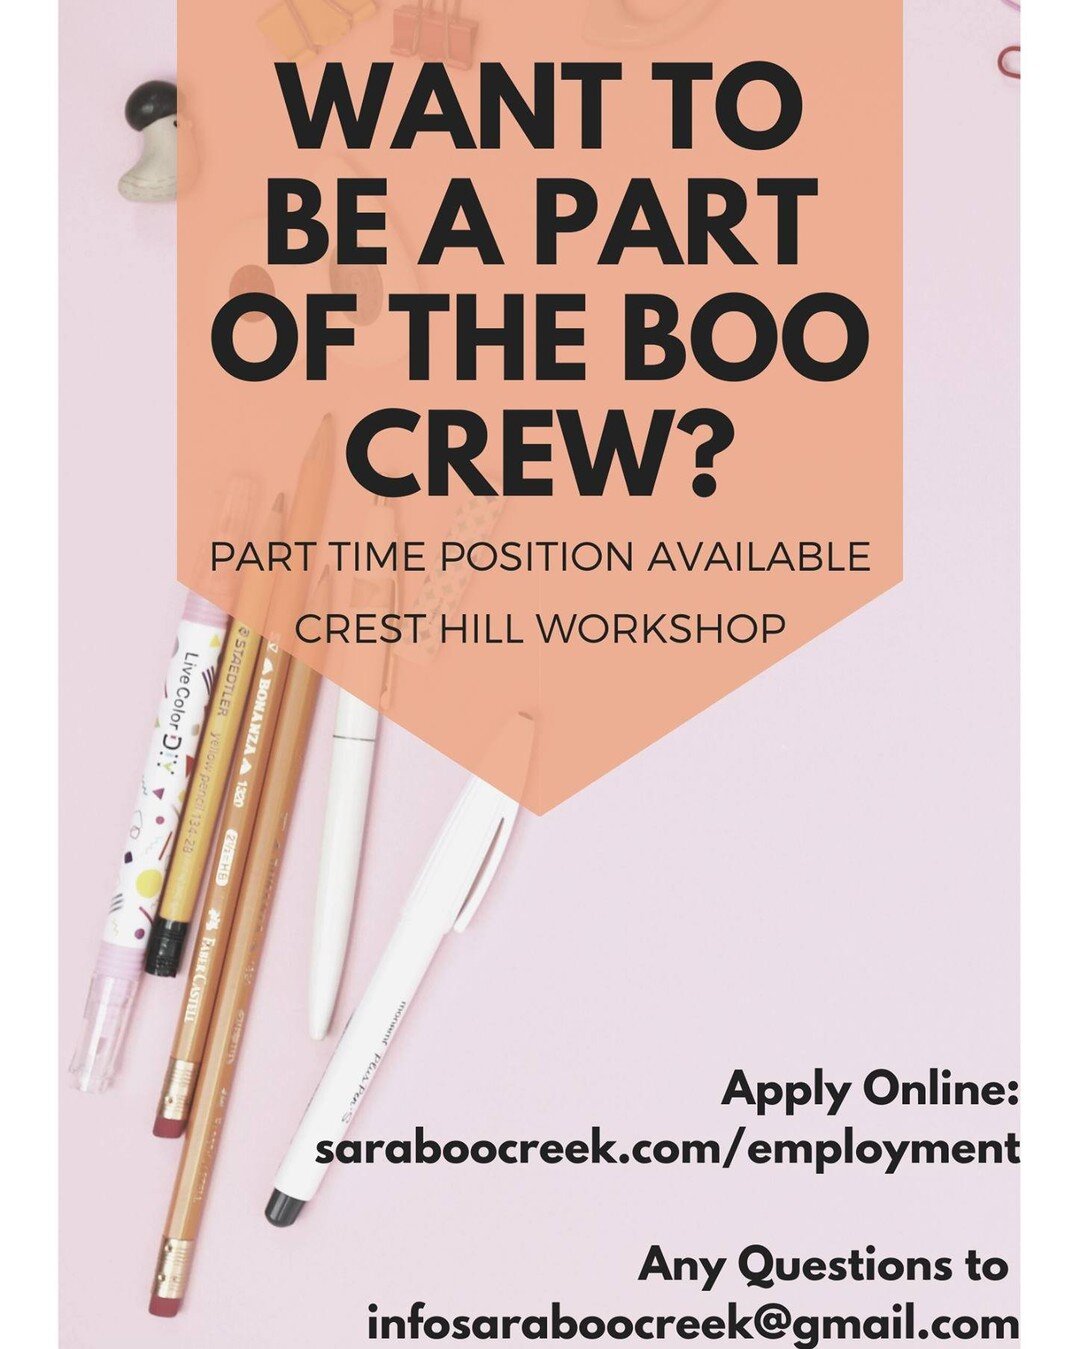 Want to be a part of the 'Boo Crew? 

We have a part time position open in our Crest Hill location involving receiving merchandise, processing web orders, some light production, and lots of all around being amazingly helpful!! Generally weekdays; som